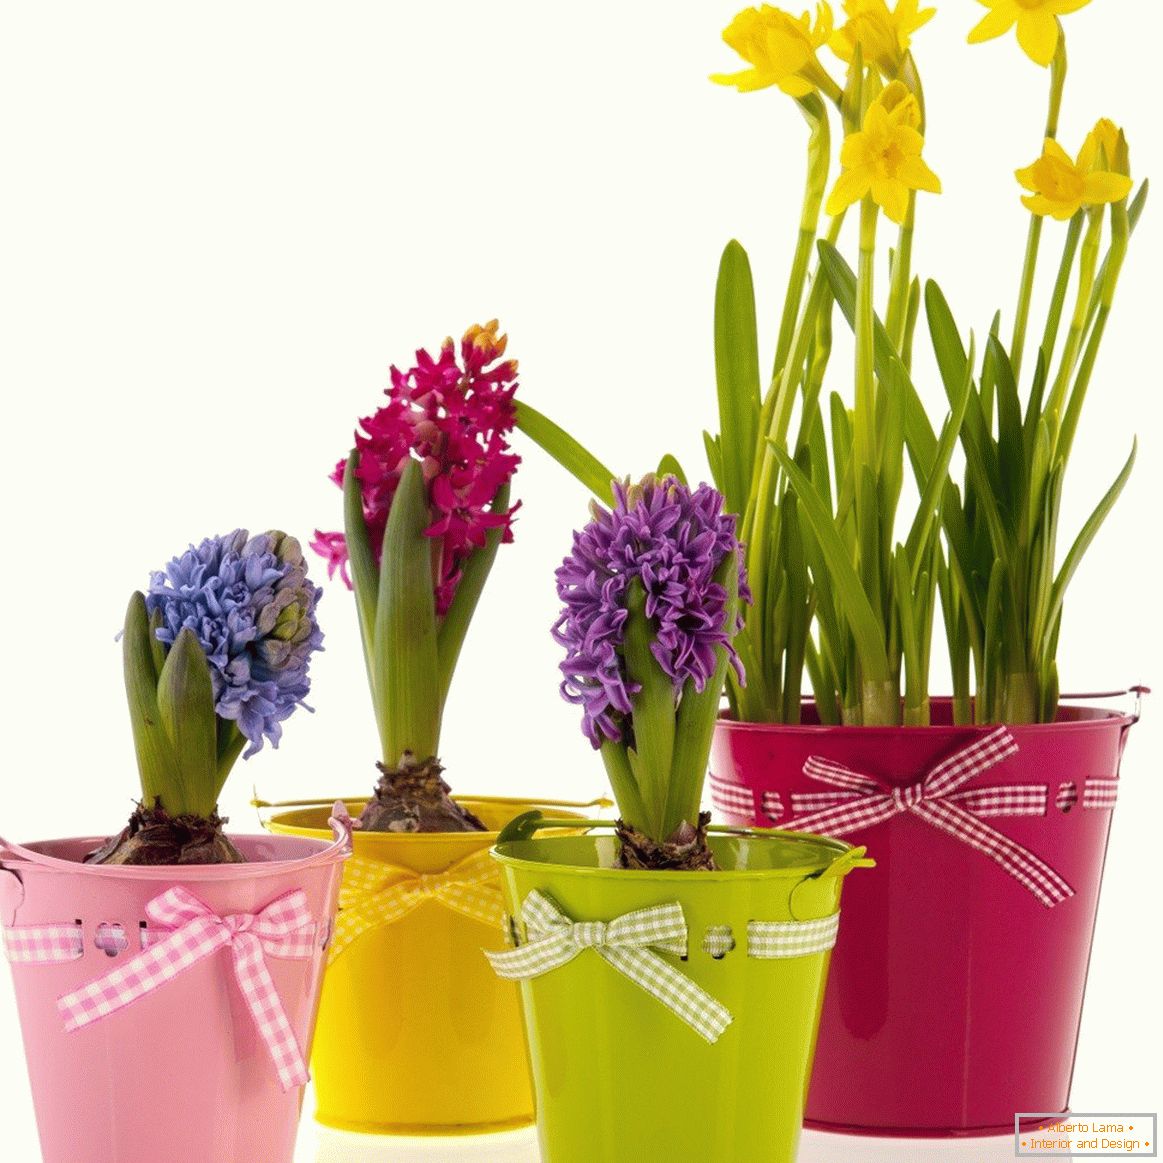 Hyacinths and daffodils in decorated pots